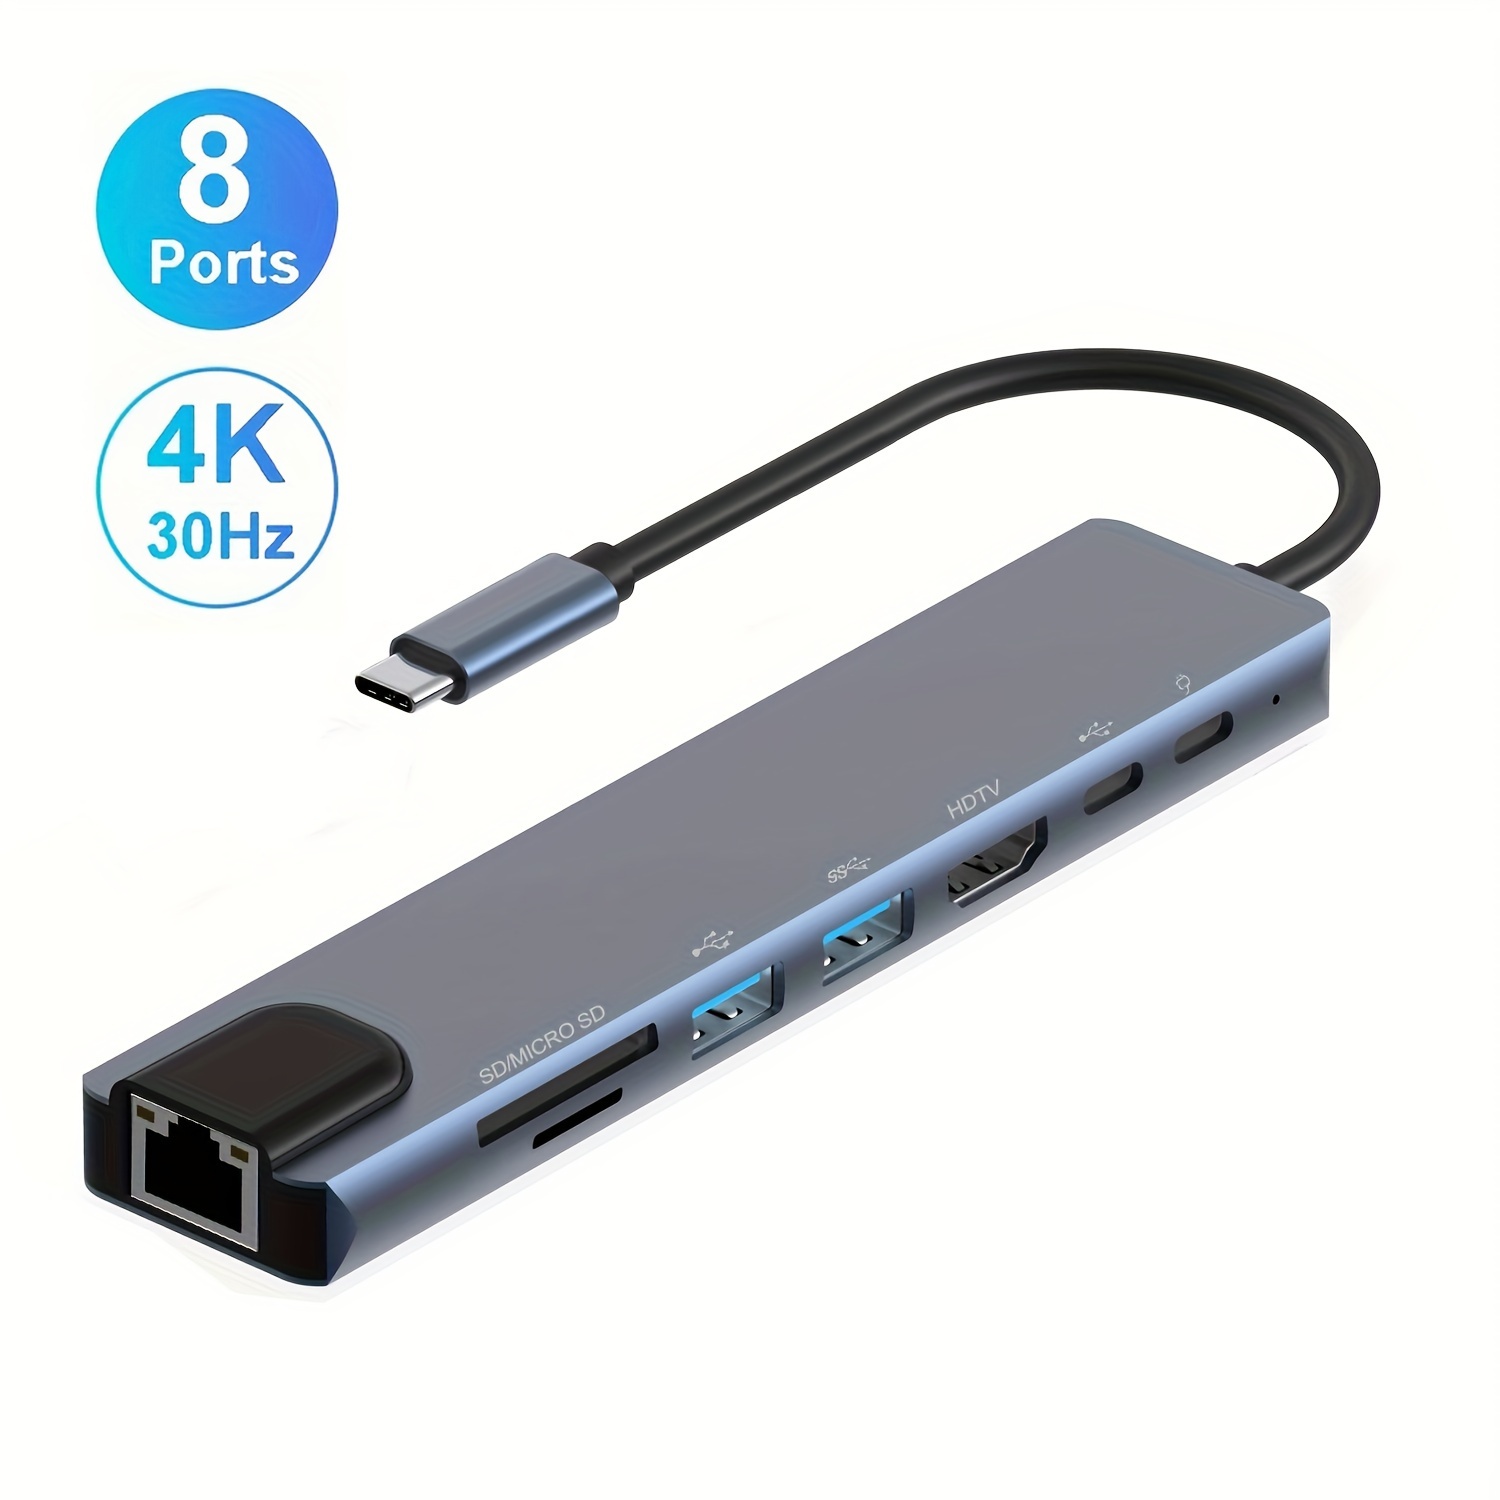 USB C Hub, 5 in 1 USB C 4K@32Hz HDMI Adapter with Ethernet Port, 100W Power  Delivery PD Type C Charging Port, USB 3.0& 2.0 Ports Adapter Compatible